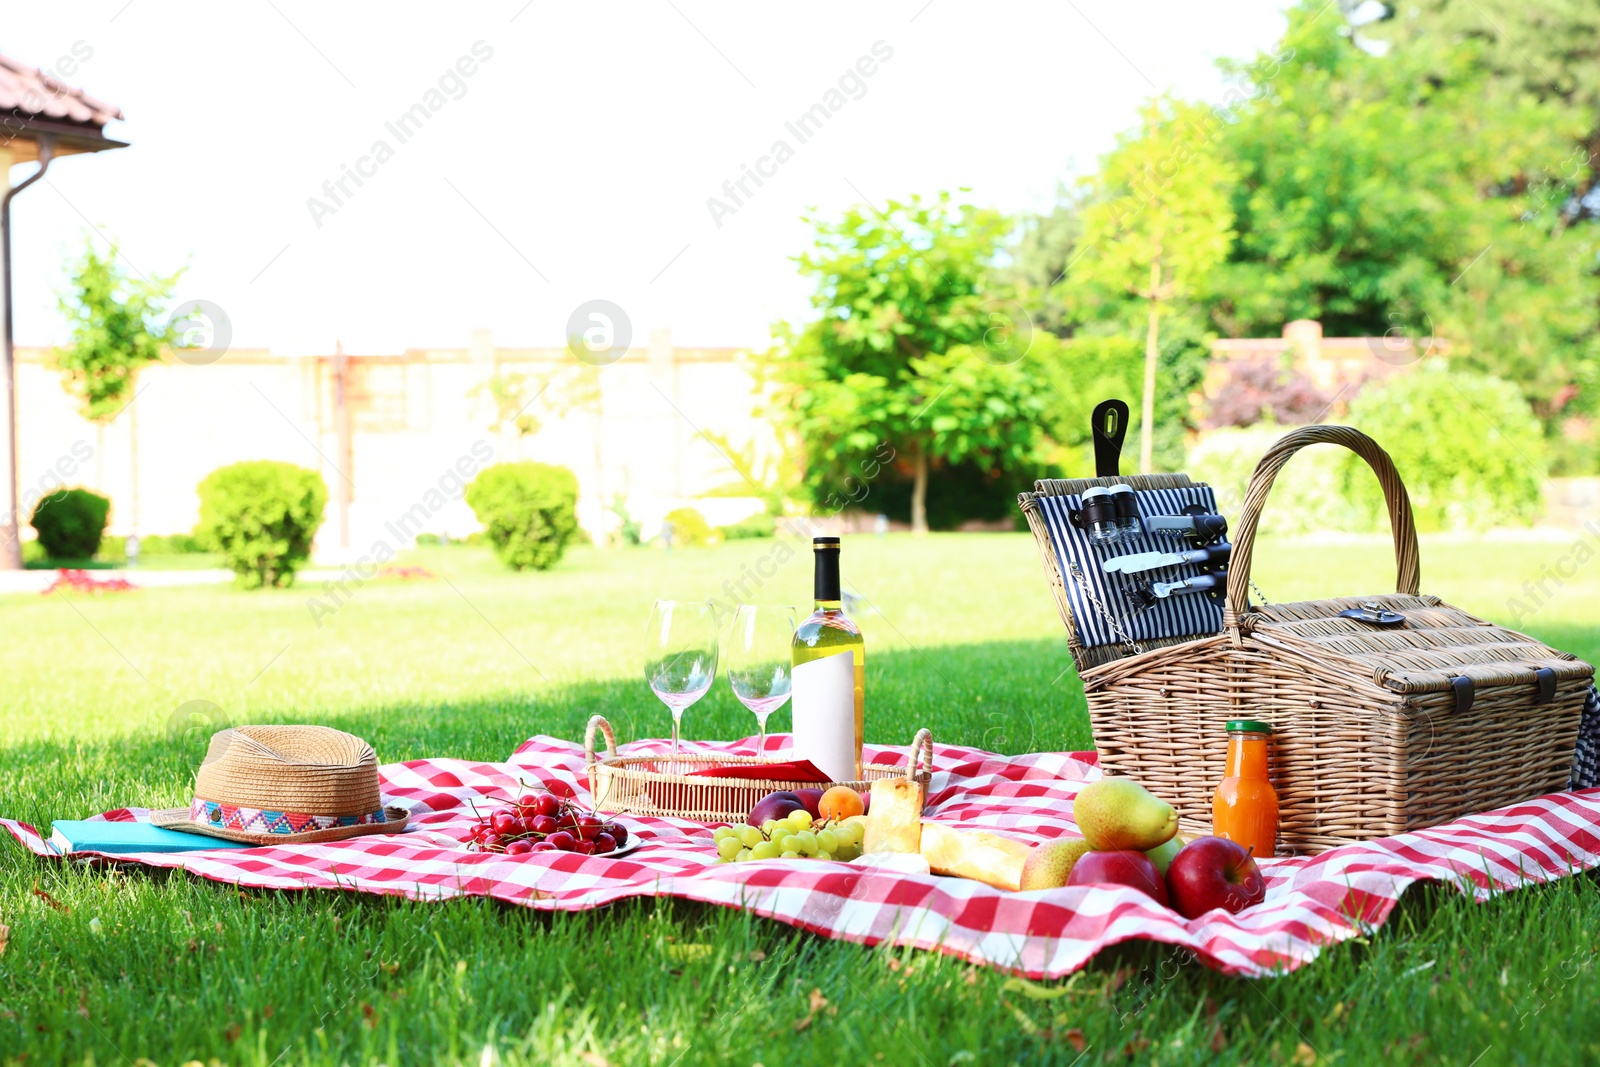 Photo of Picnic basket with products and bottle of wine on checkered blanket in garden